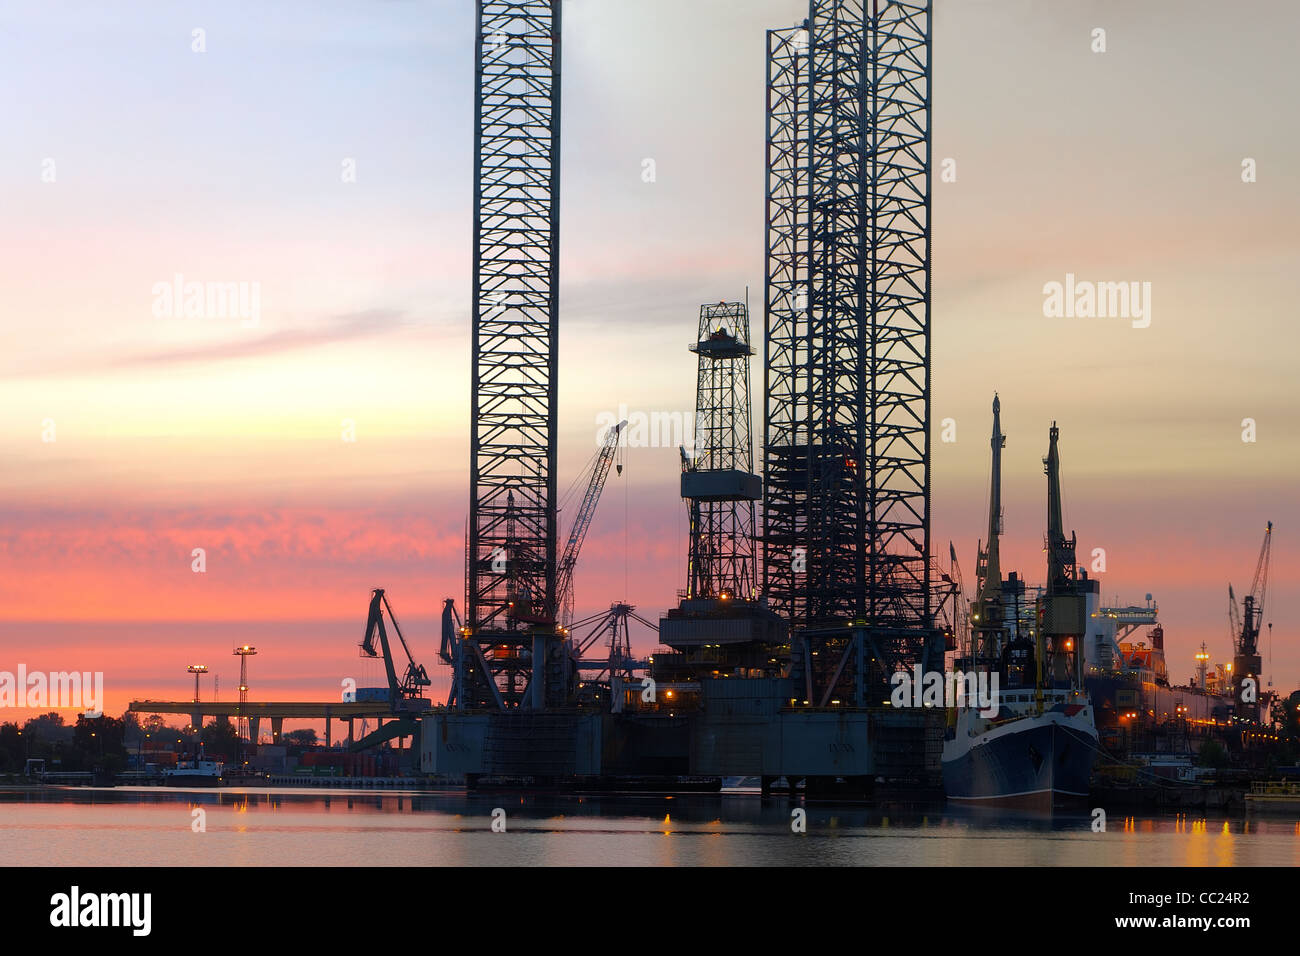 Oil Rig in the morning at the shipyard. Stock Photo